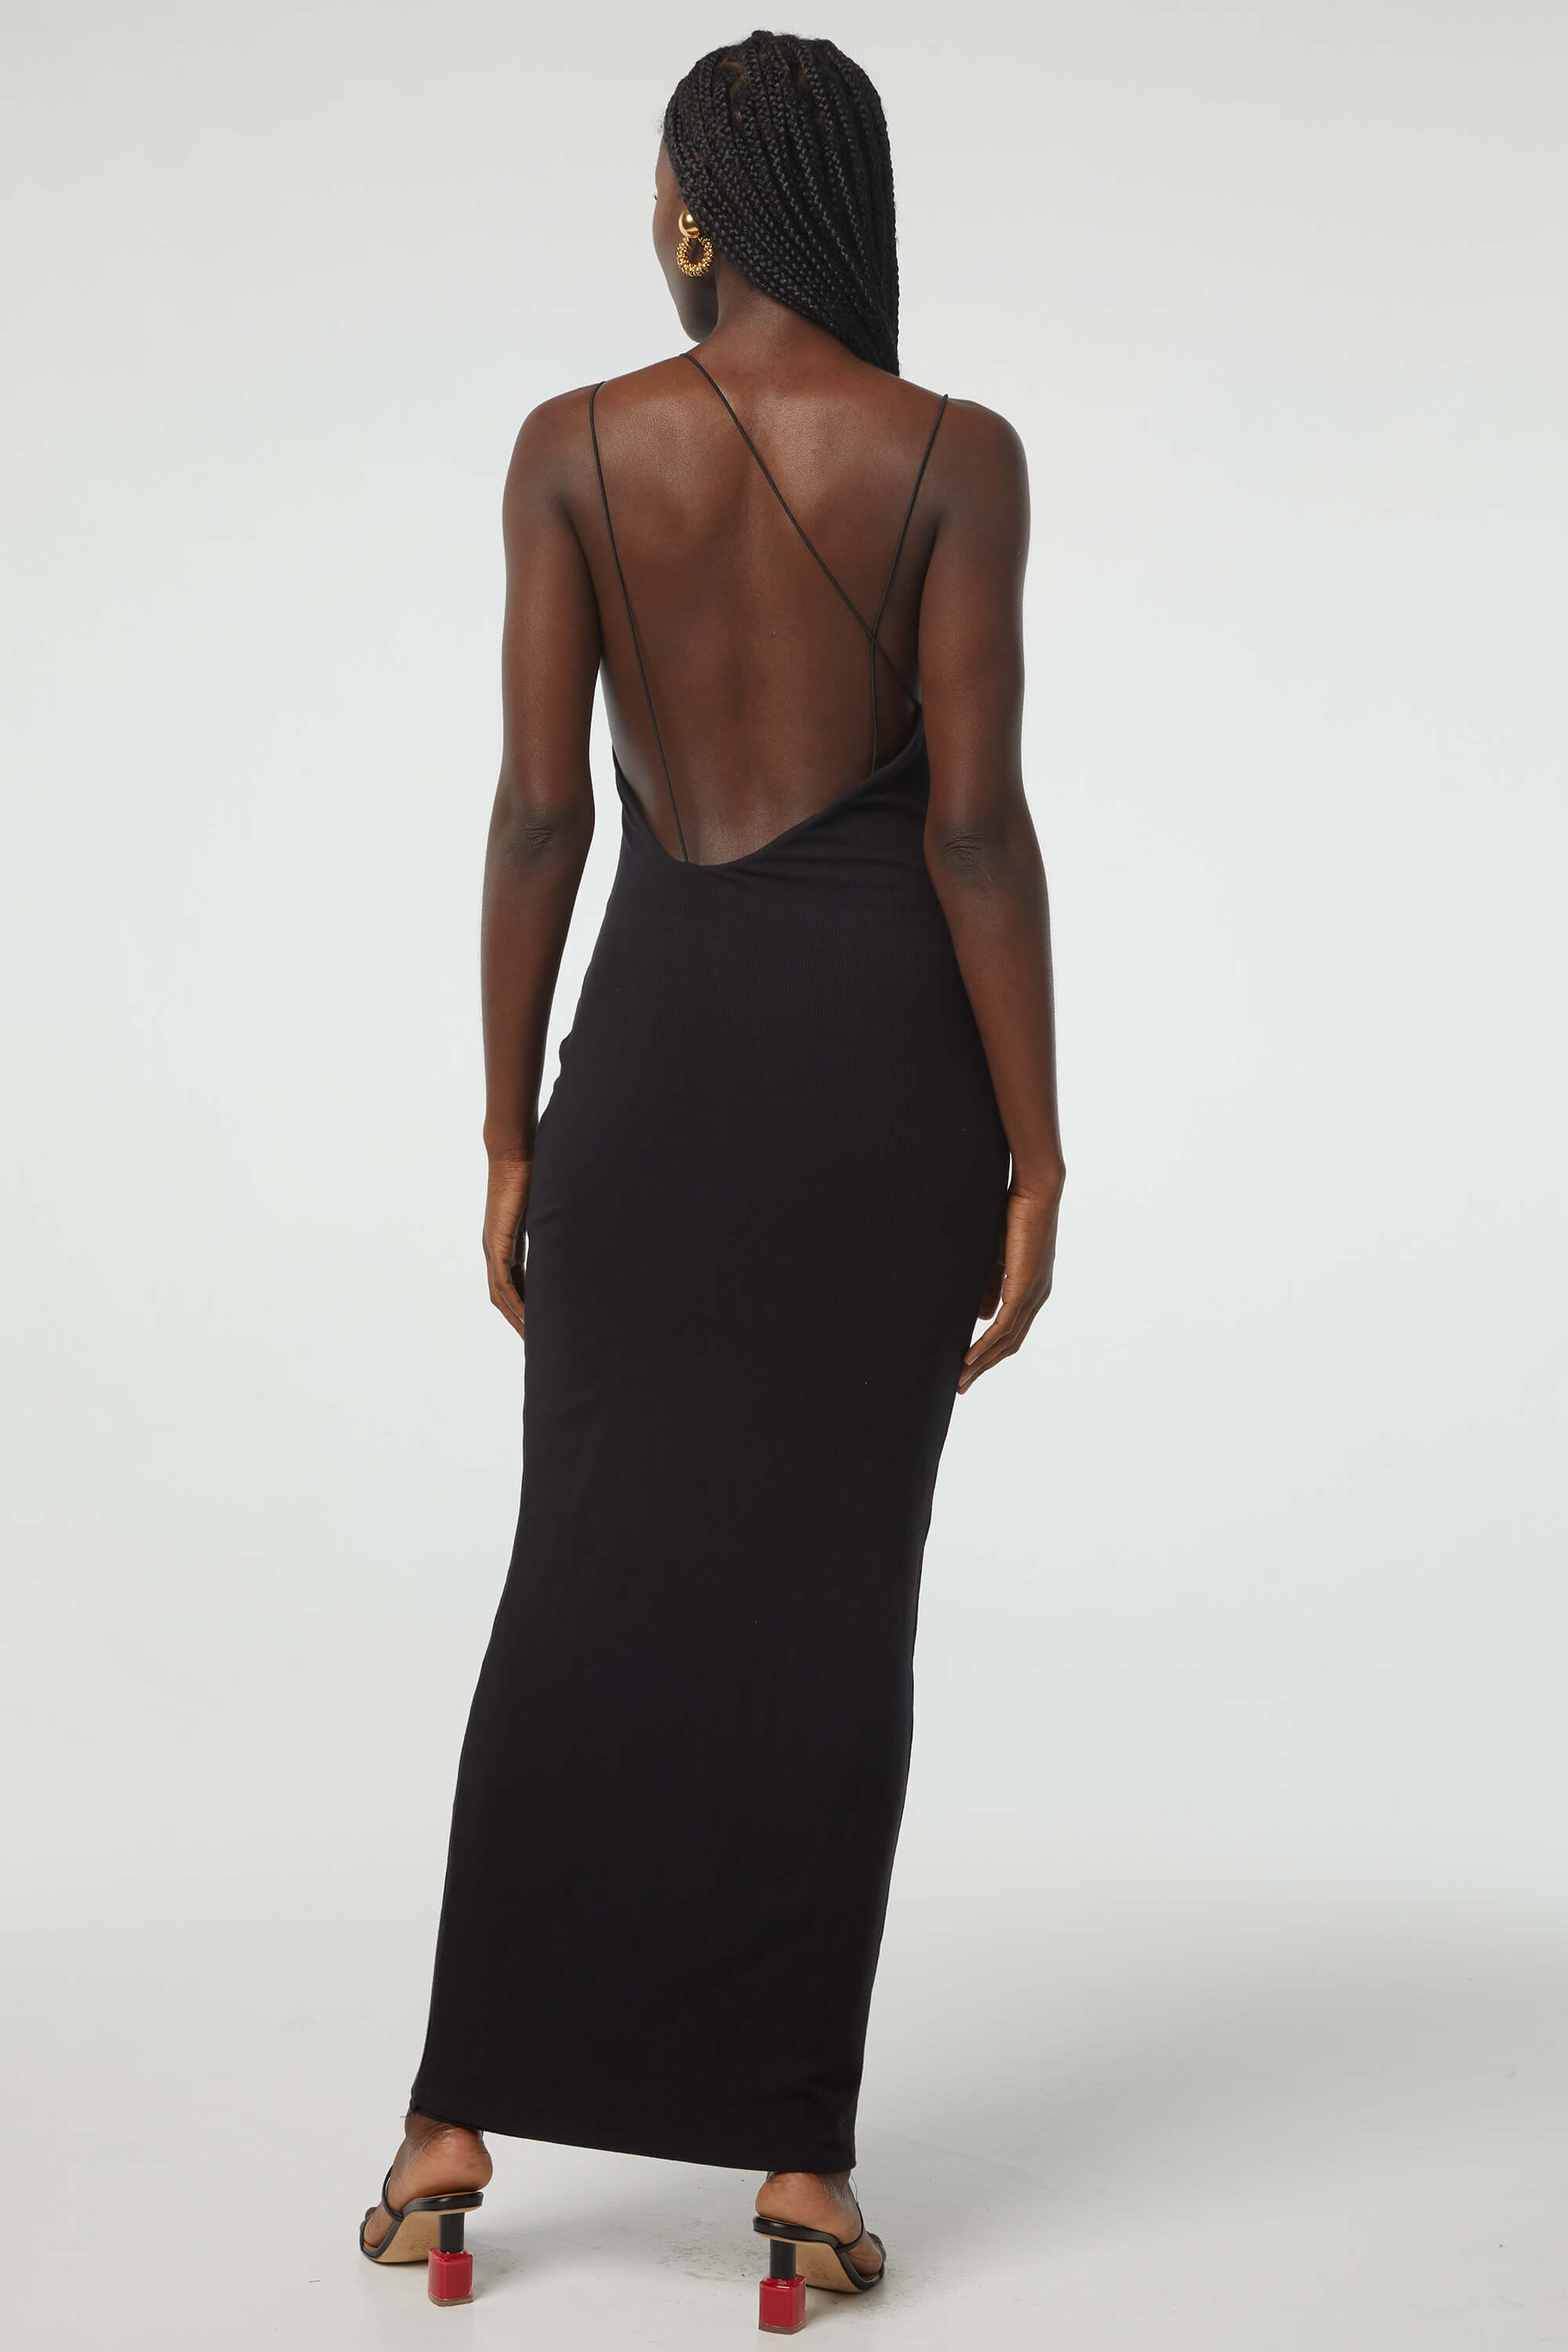 The Line By K Ceci Dress in Black available at TNT The New Trend Australia. Free shipping on orders over $300 AUD.